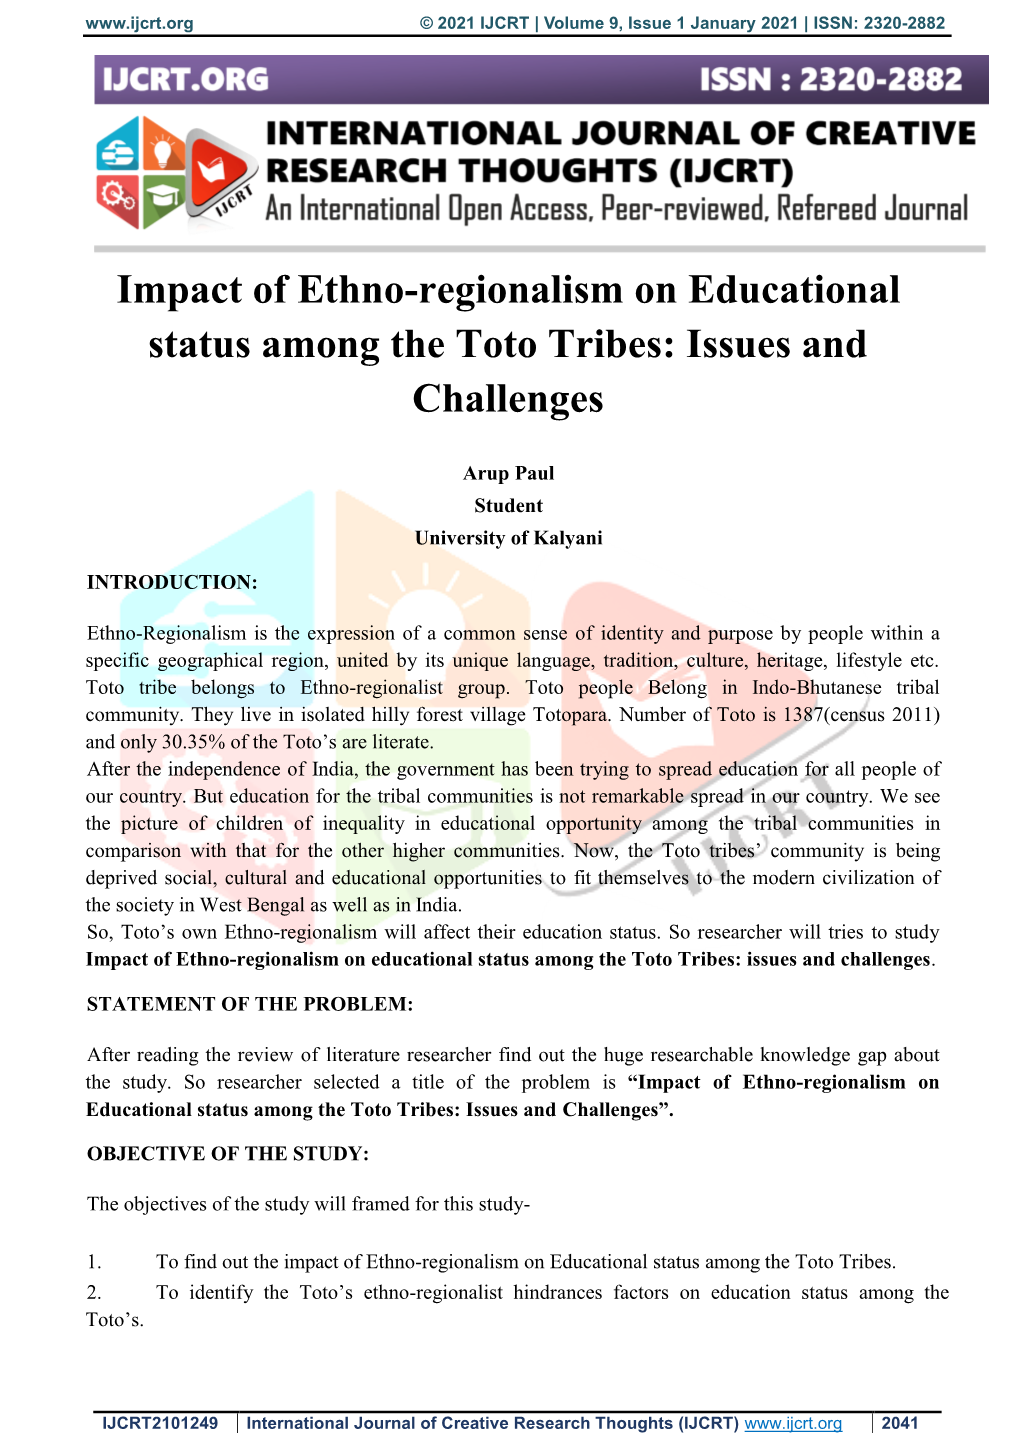 Impact of Ethno-Regionalism on Educational Status Among the Toto Tribes: Issues and Challenges